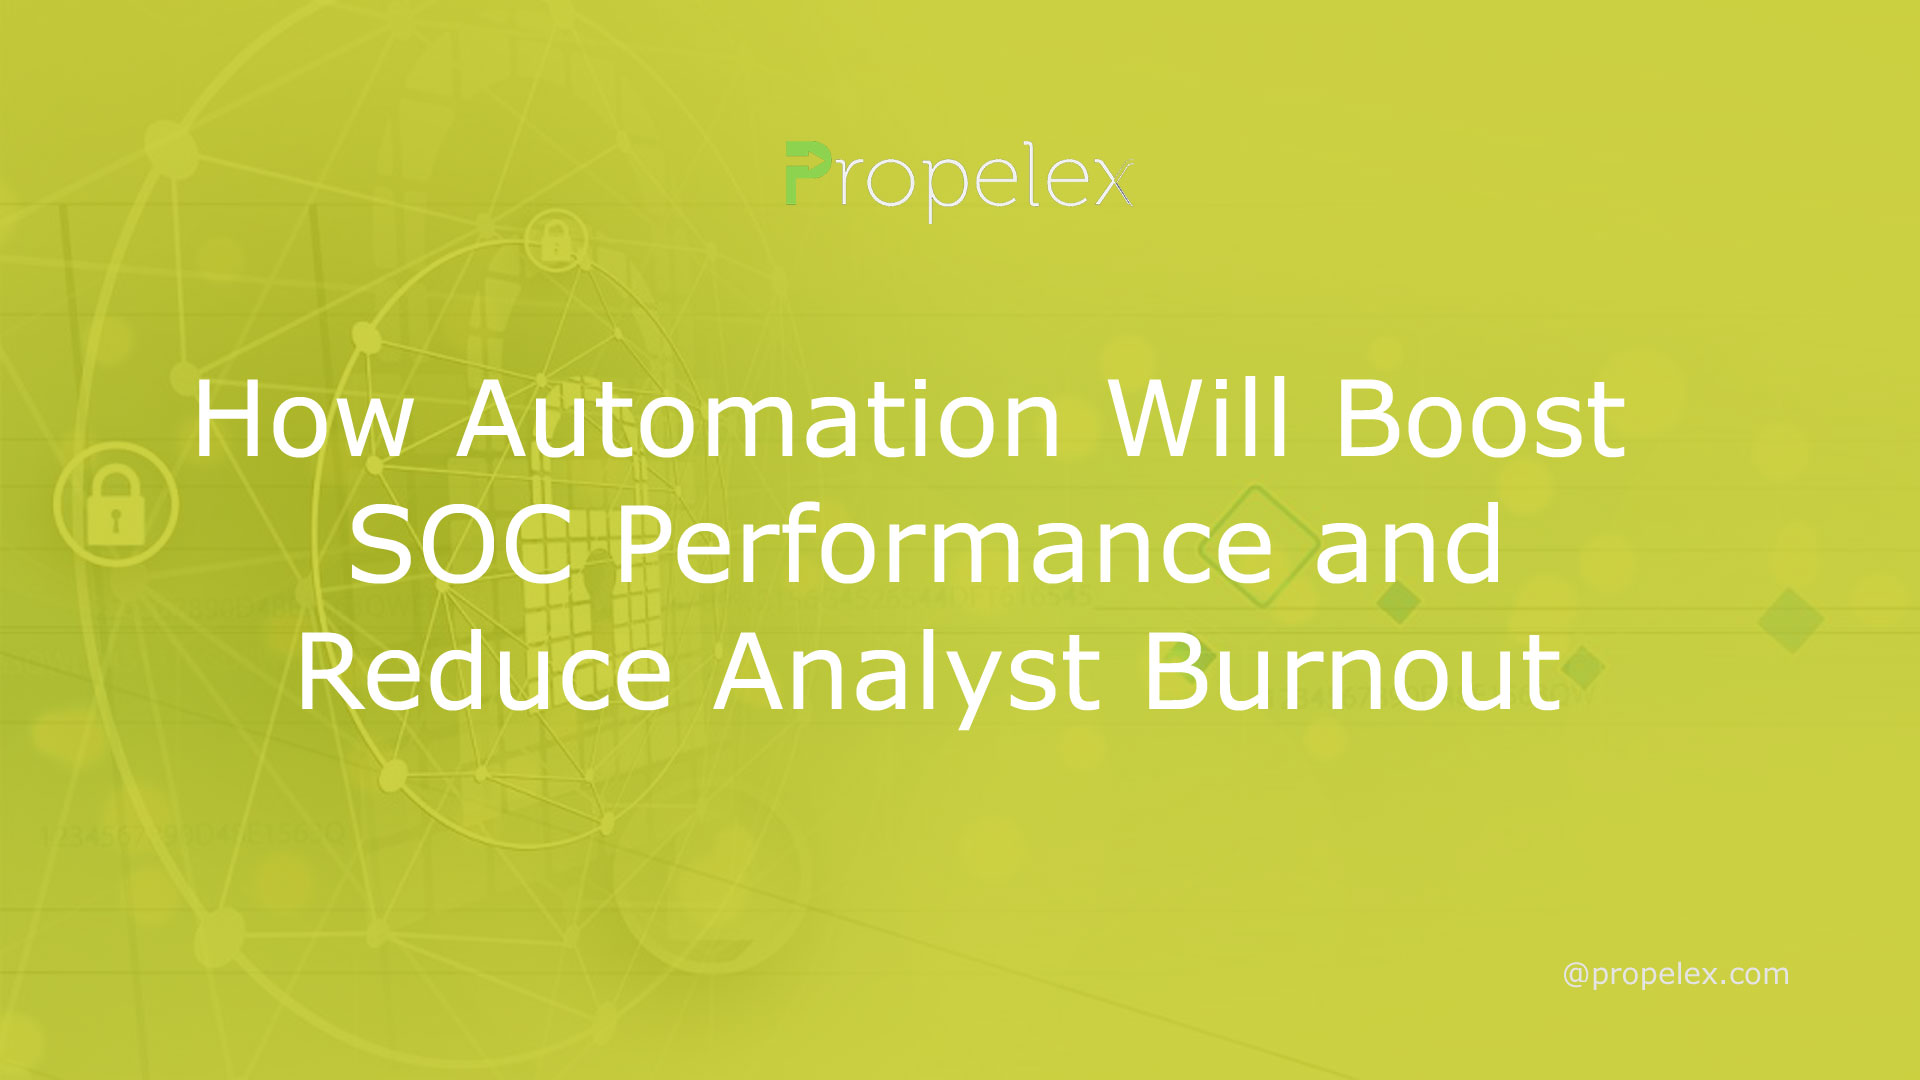 How Automation Will Boost SOC Performance and Reduce Analyst Burnout